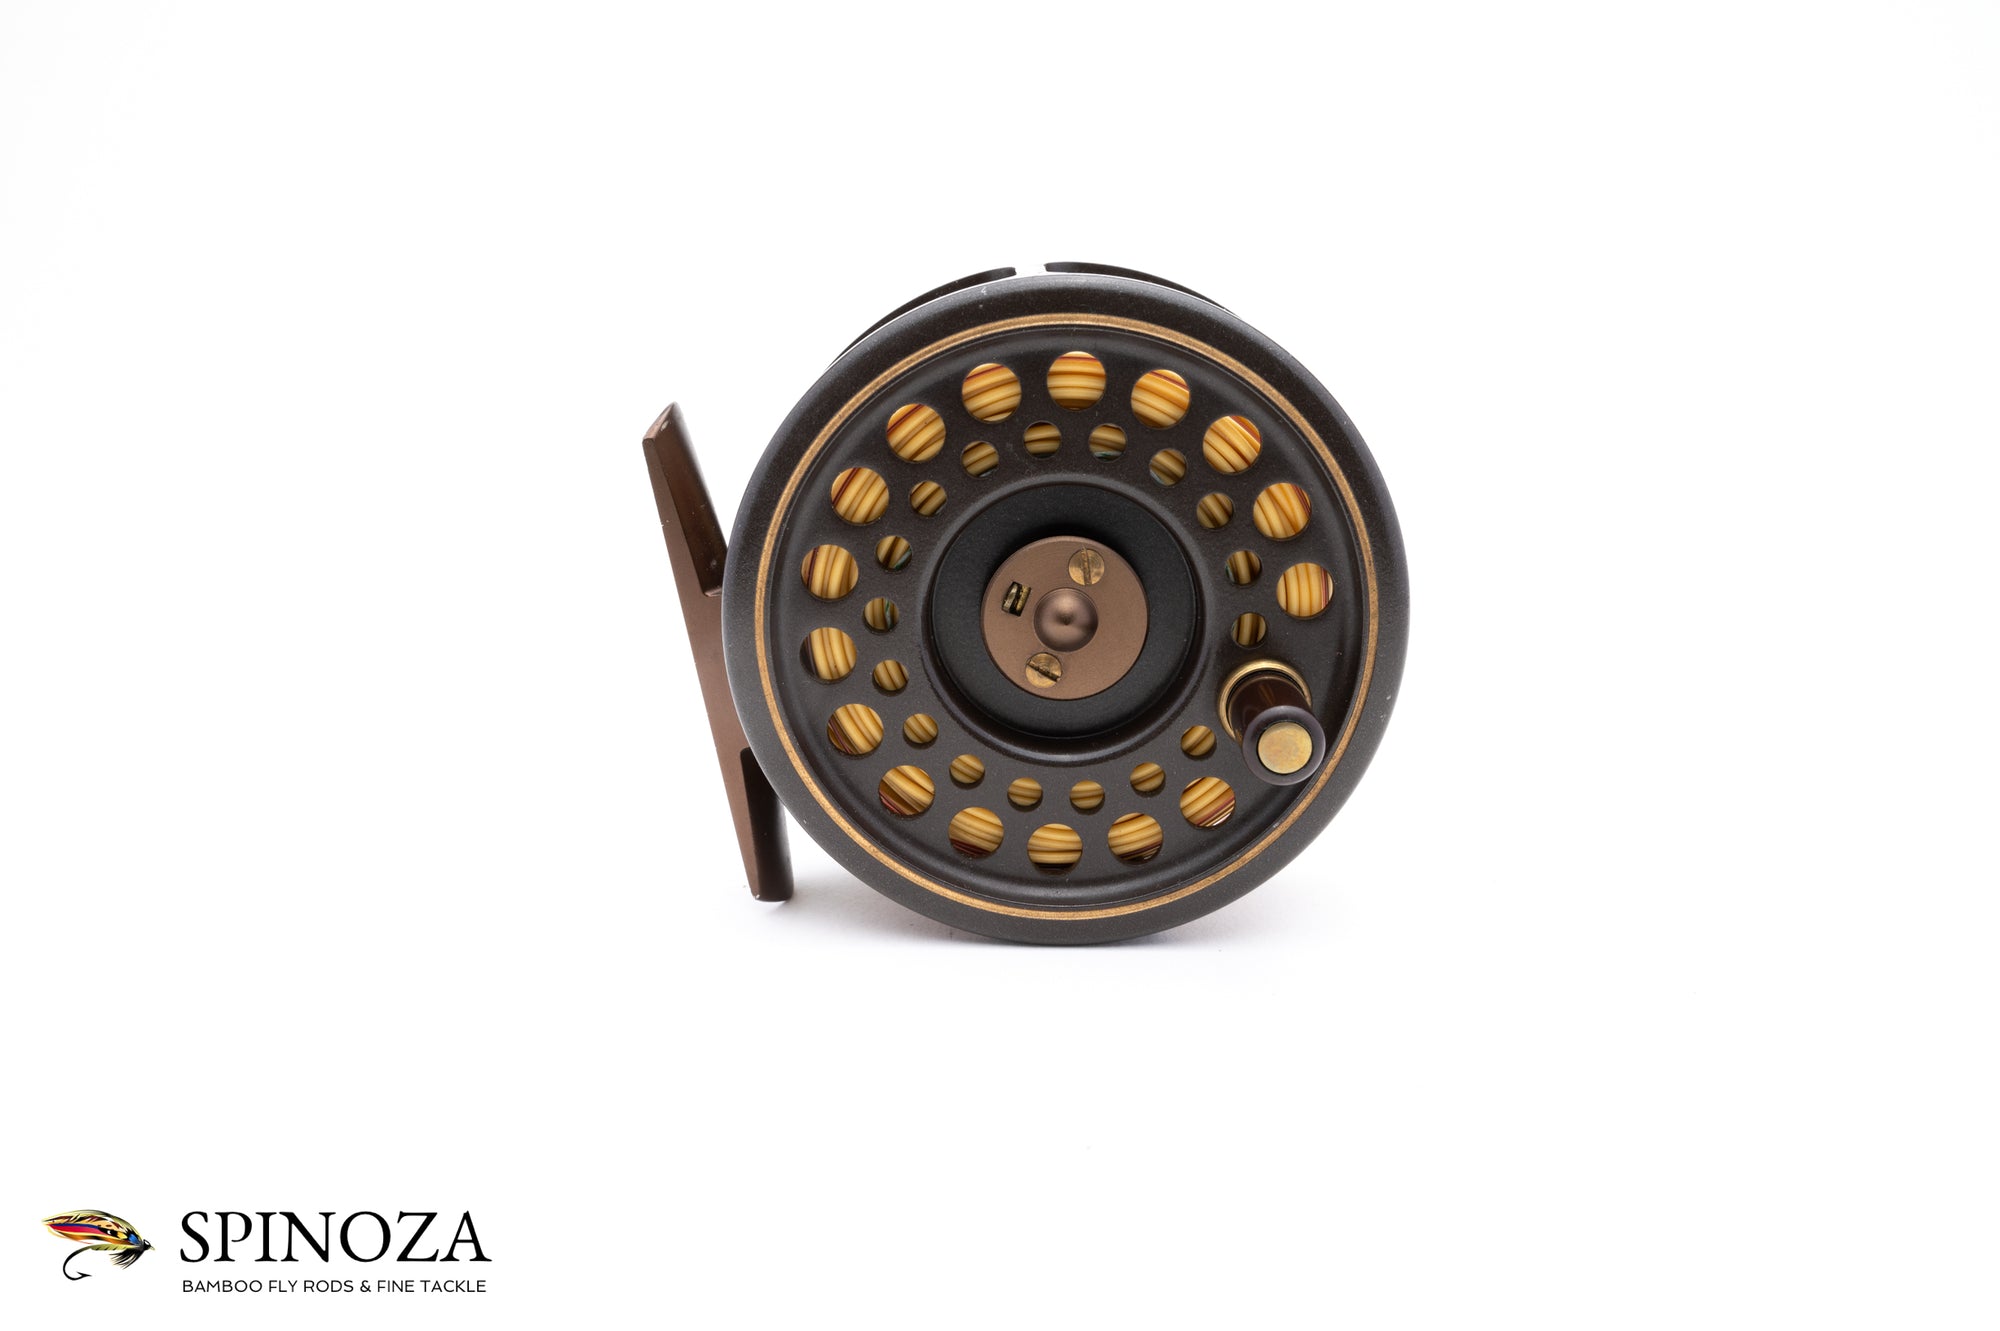 Used Hardy Fly Reel - 4 For Sale on 1stDibs